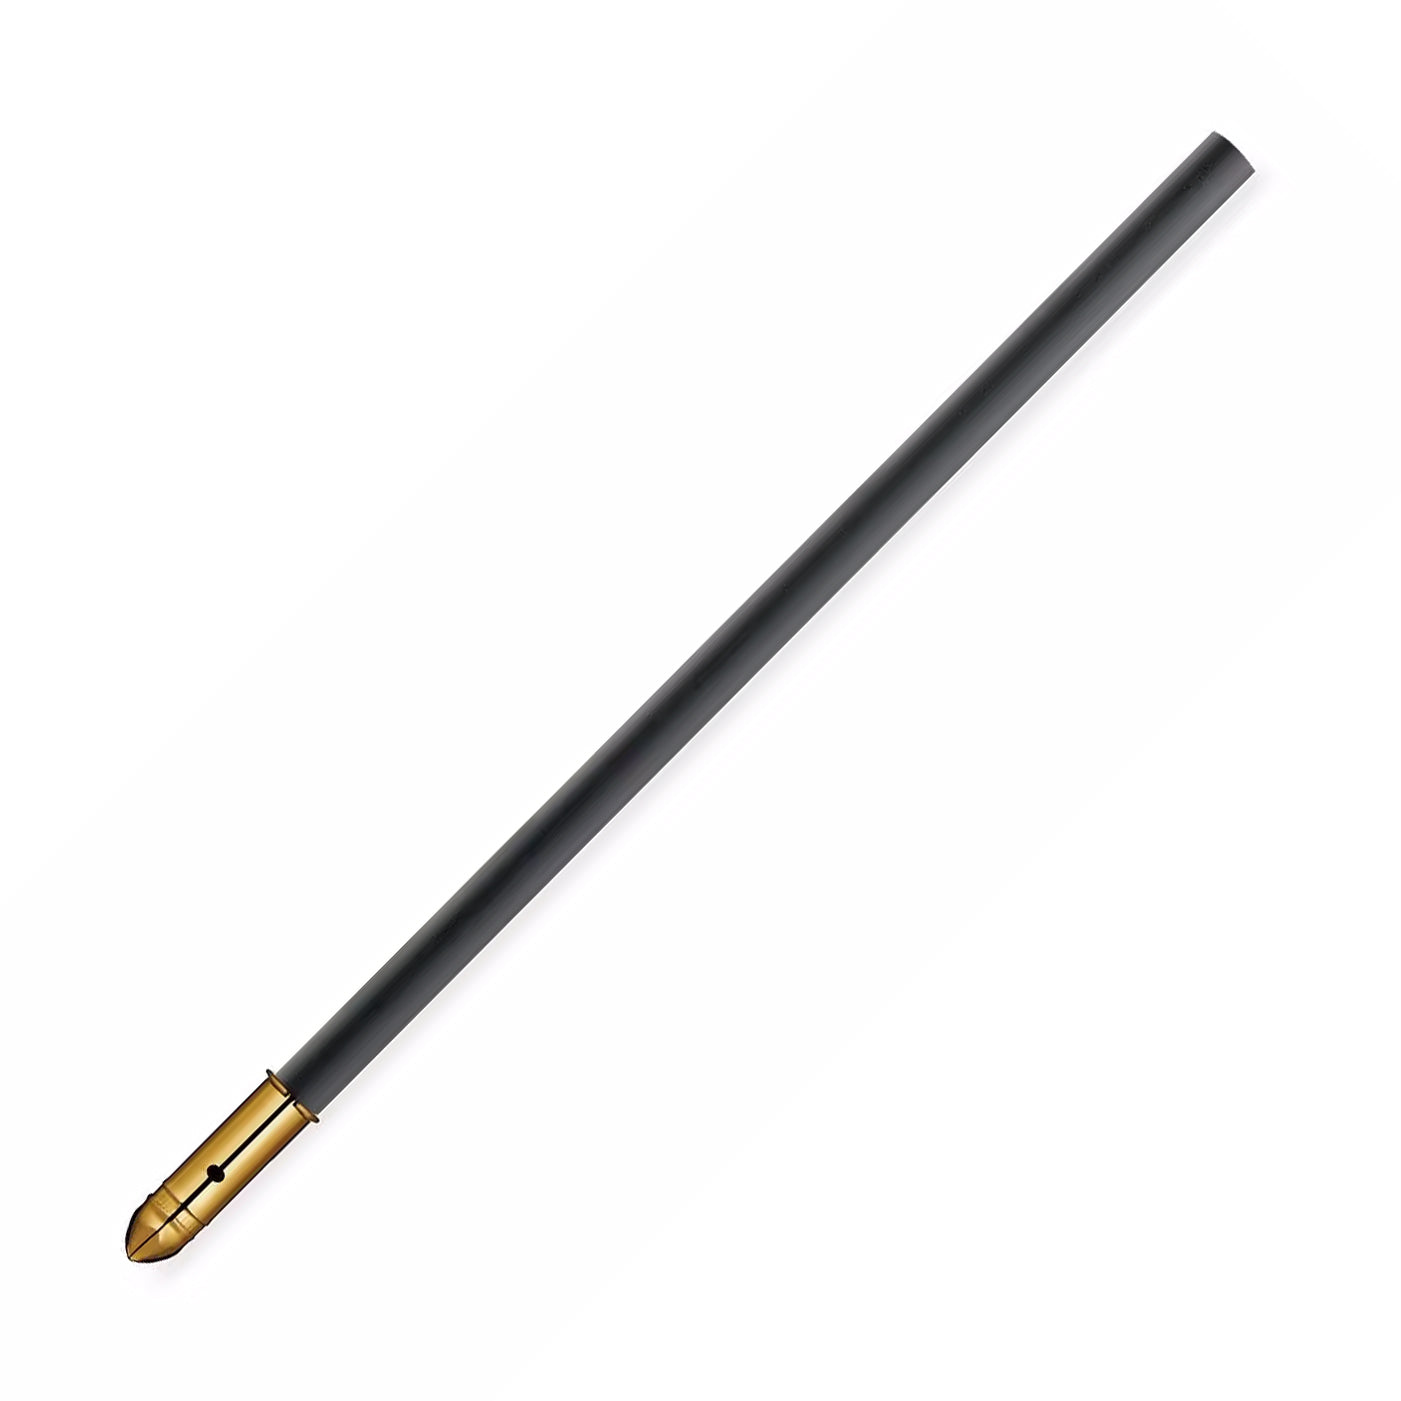 e+m Holzprodukte Pencil Cap - Brass - Lead Protector Made in Germany with pencil capped